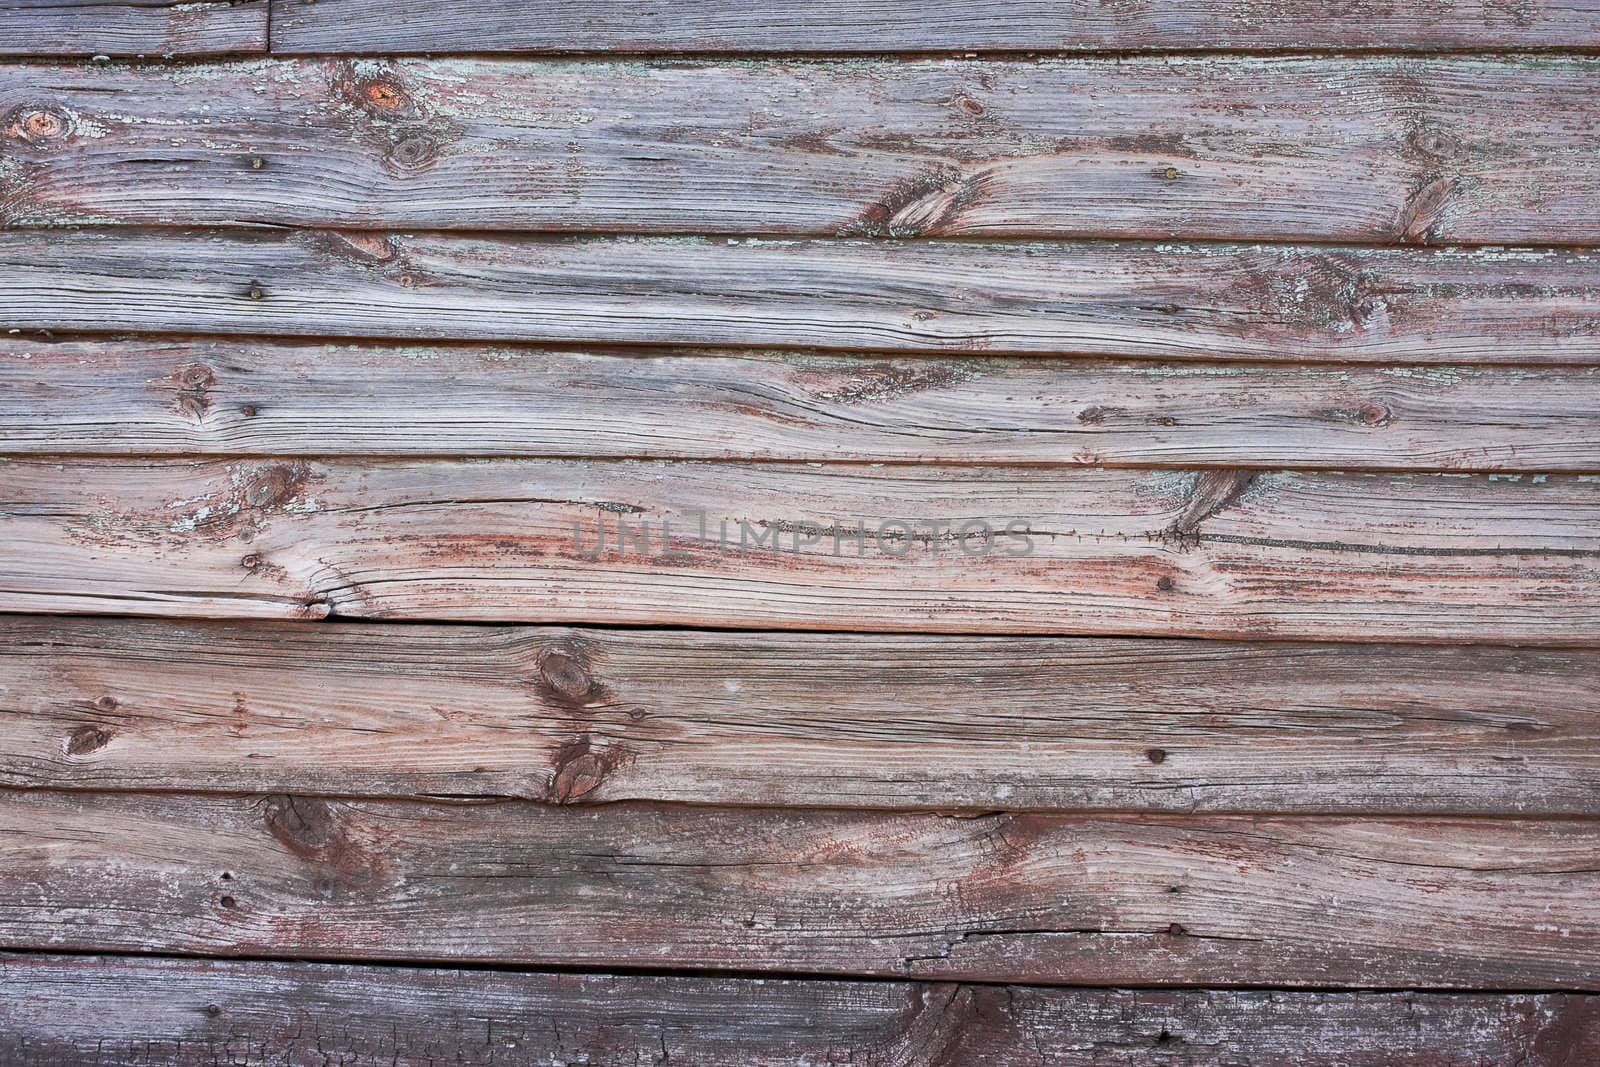 Grungy wood plank texture for background